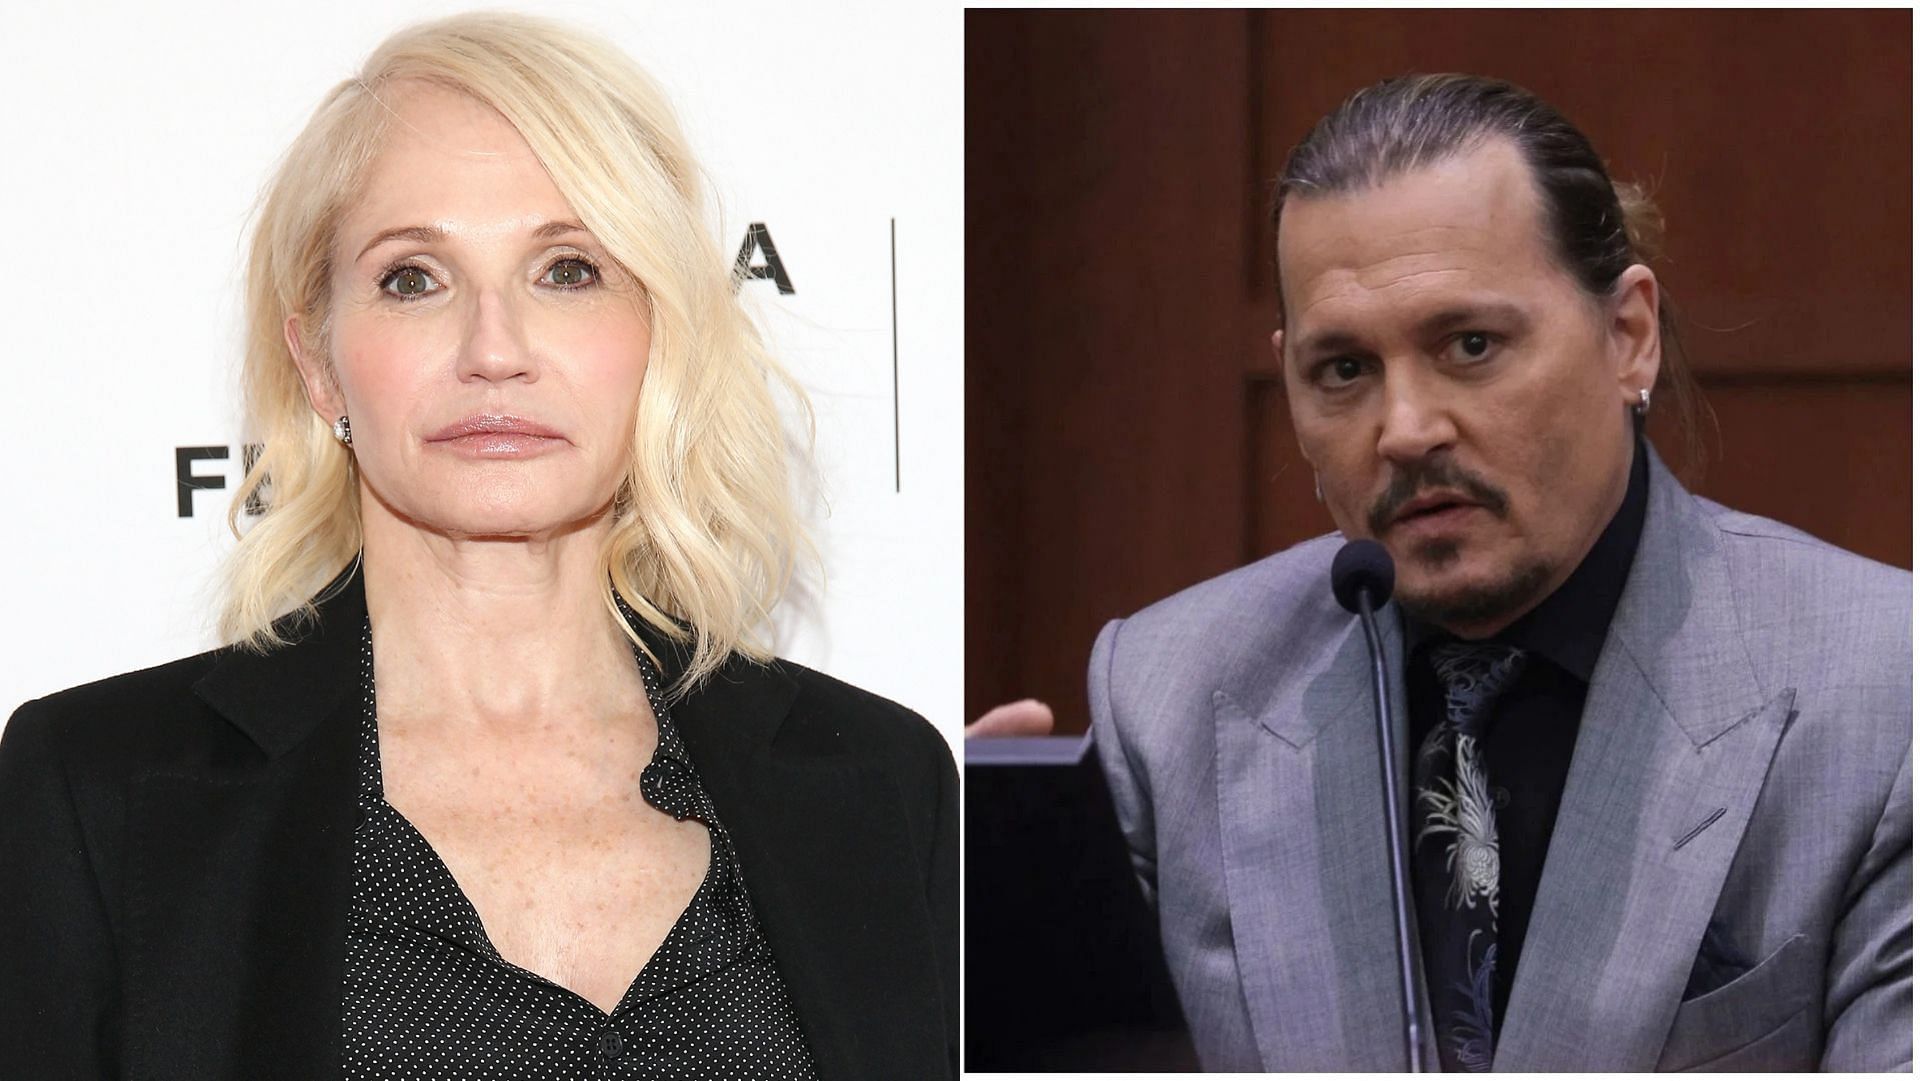 Ellen Barkin and Johnny Depp (Image via Paul Zimmerman/Getty Images, and Evelyn Hocksteinp/Pool/AFP/Getty Images)